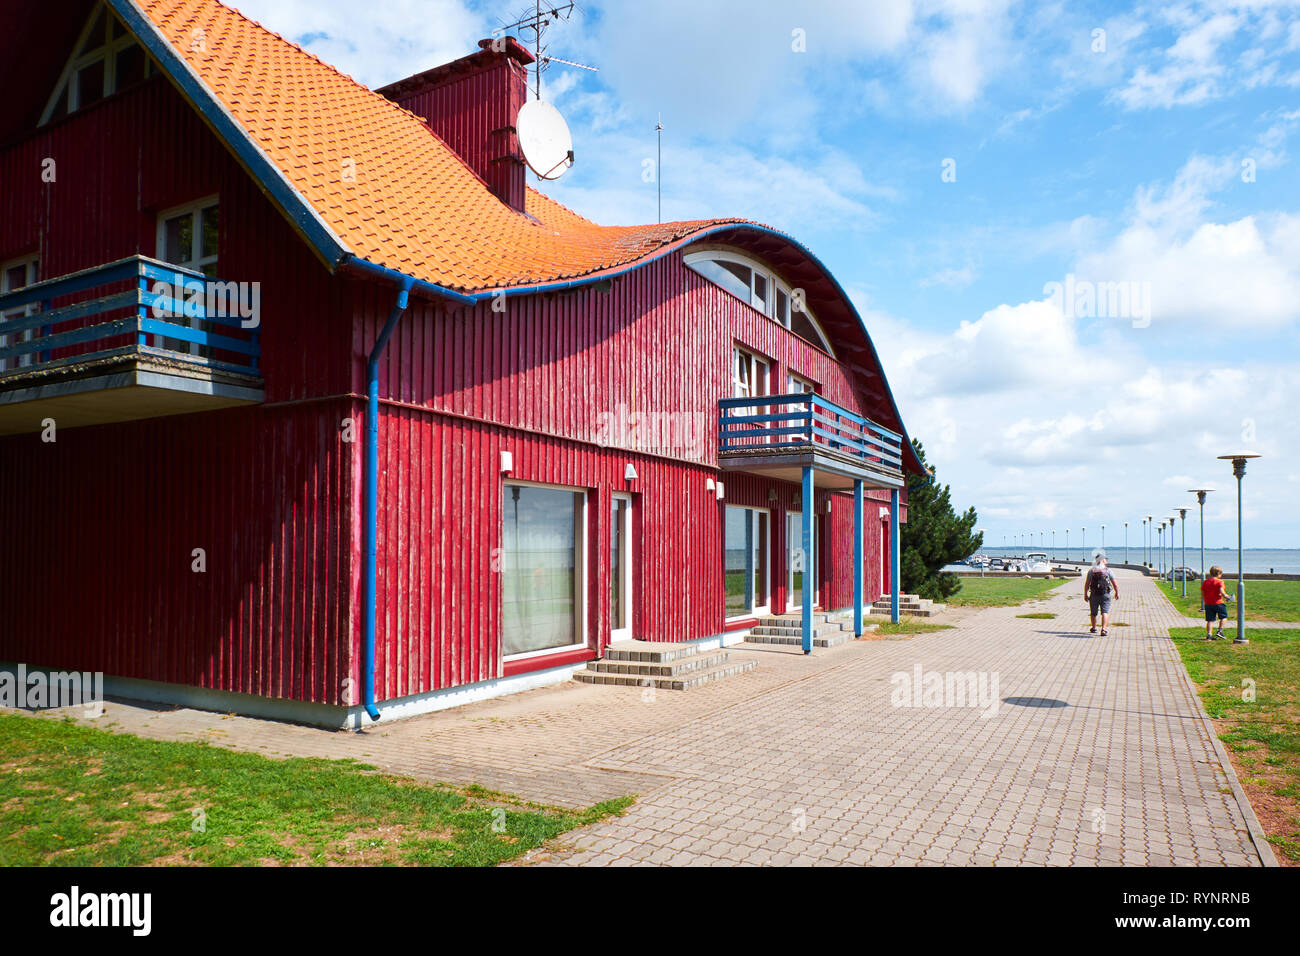 JUODKRANTE, LITHUANIA - AUGUST 06, 2018: Traditional wooden village house. Juodkrante is a resort town at Curonian Spit  in Lithuania Stock Photo